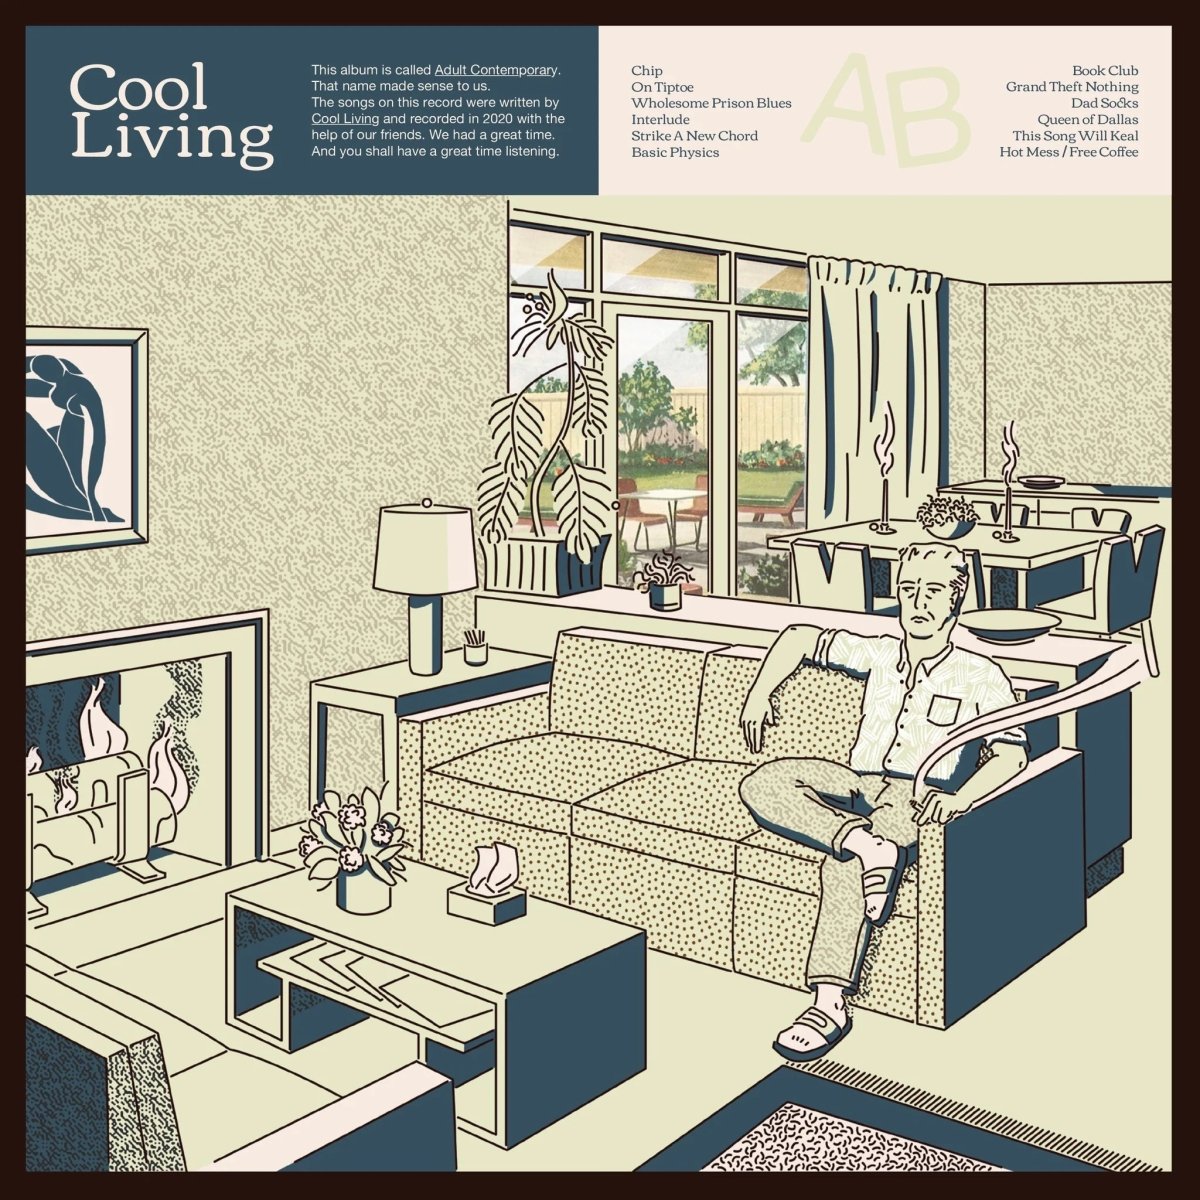 Cool Living - Adult Contemporary [Vinyl]